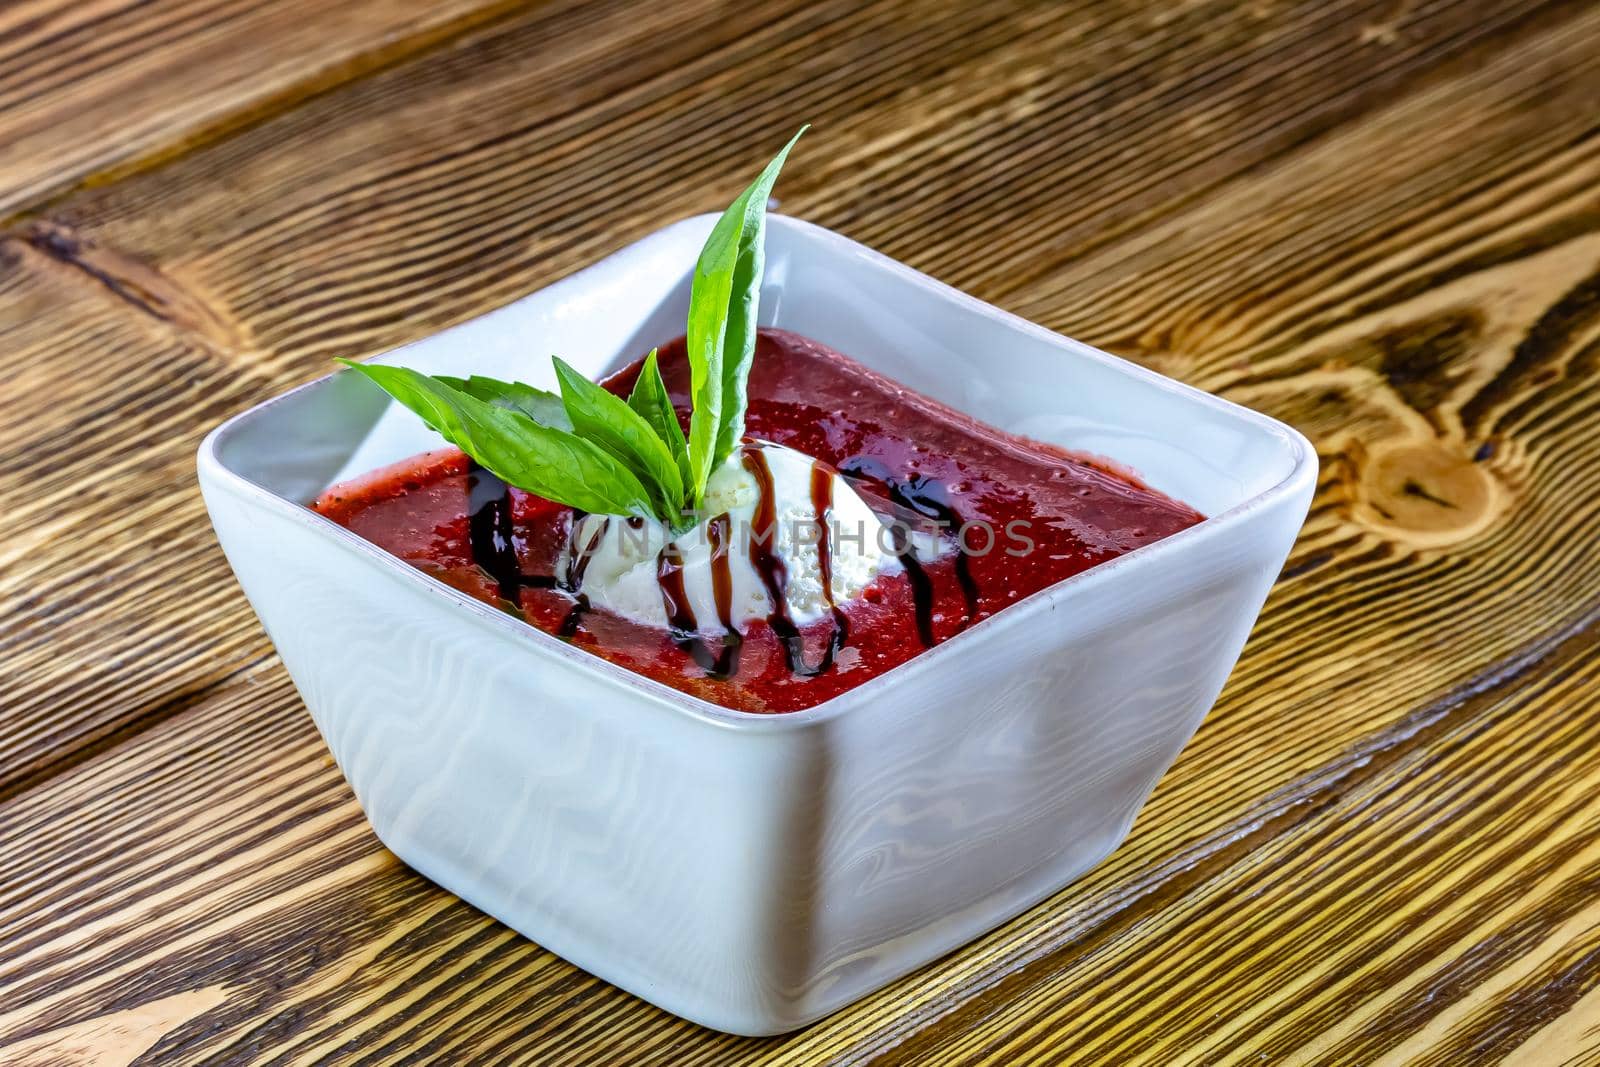 Tasty sweet dessert of ice cream poured with berry sirup in glass ramekin on wooden table. From above. Unfocused background.